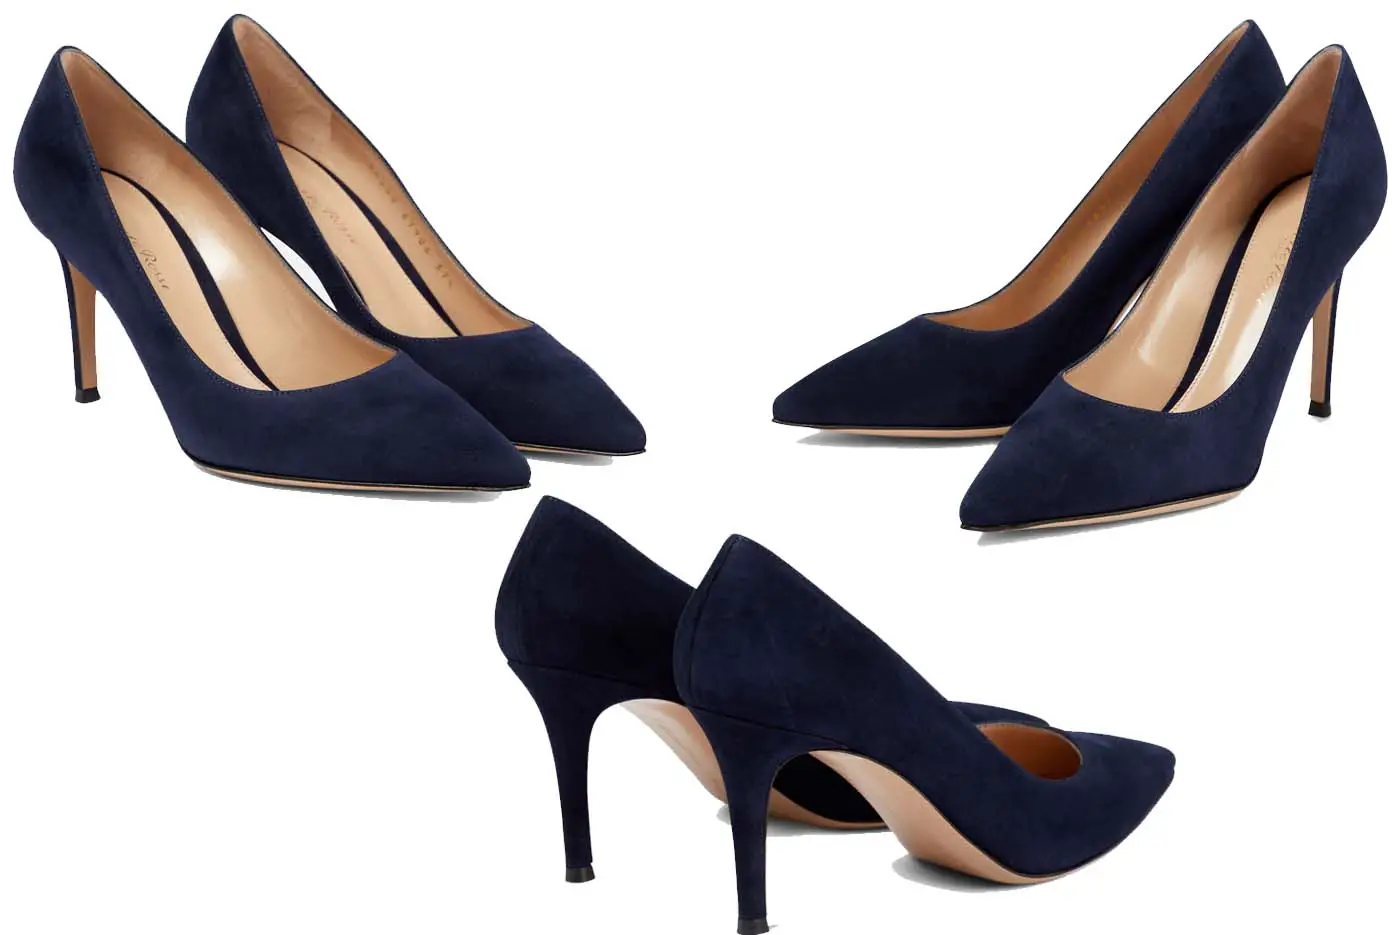 The Princess of Wales wore Gianvito Rossi Gianvito 85 Navy Pumps